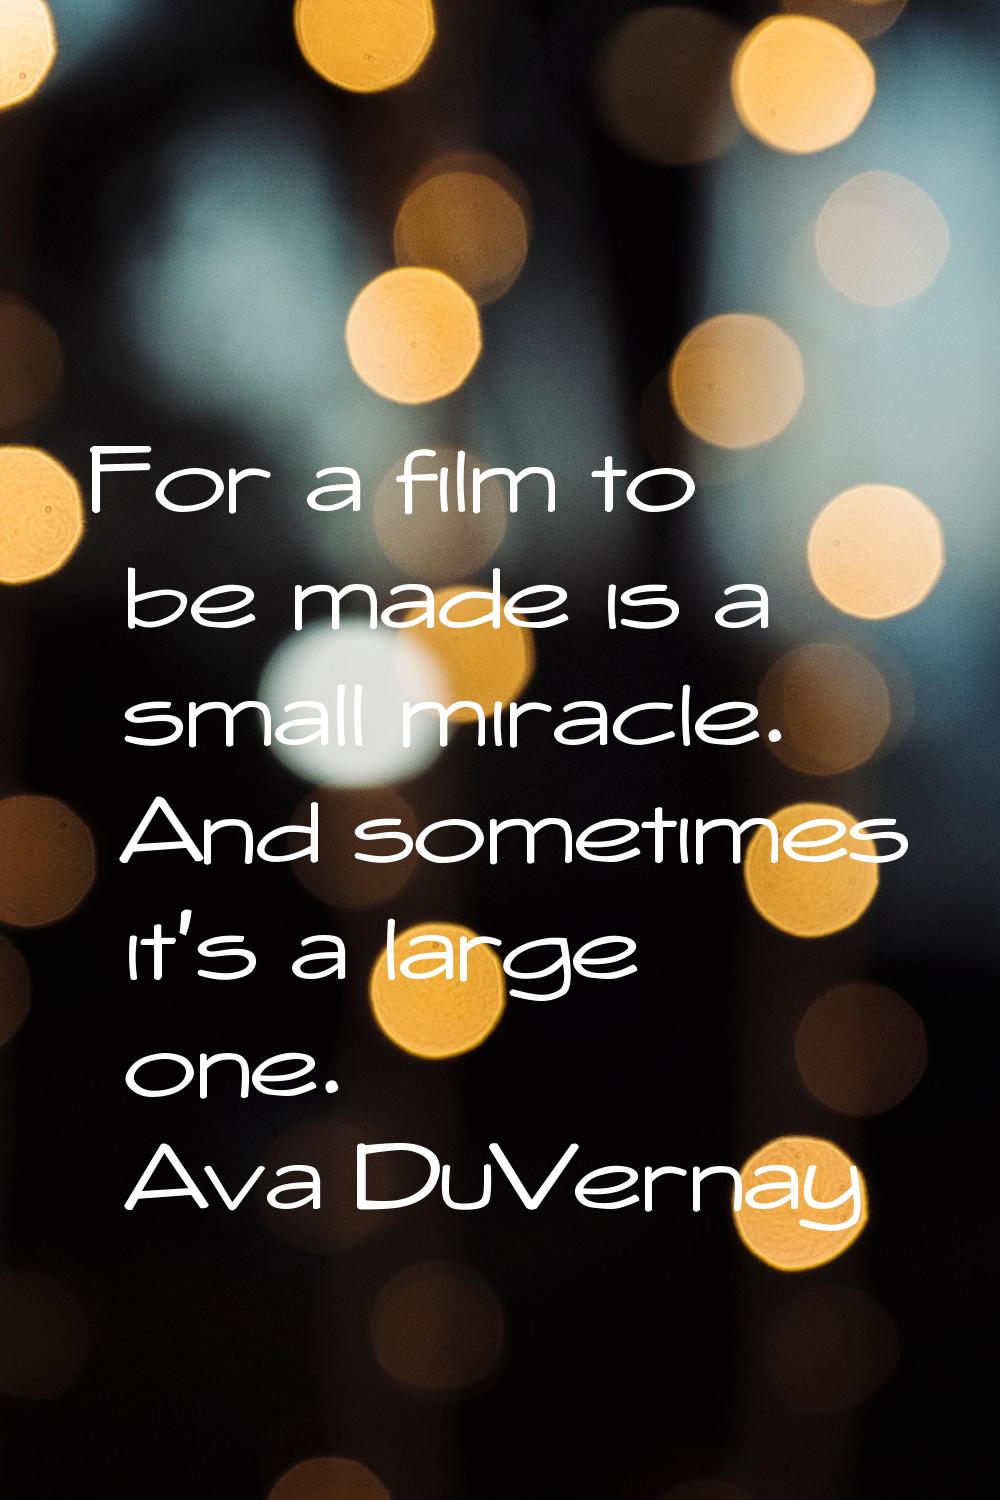 For a film to be made is a small miracle. And sometimes it's a large one.